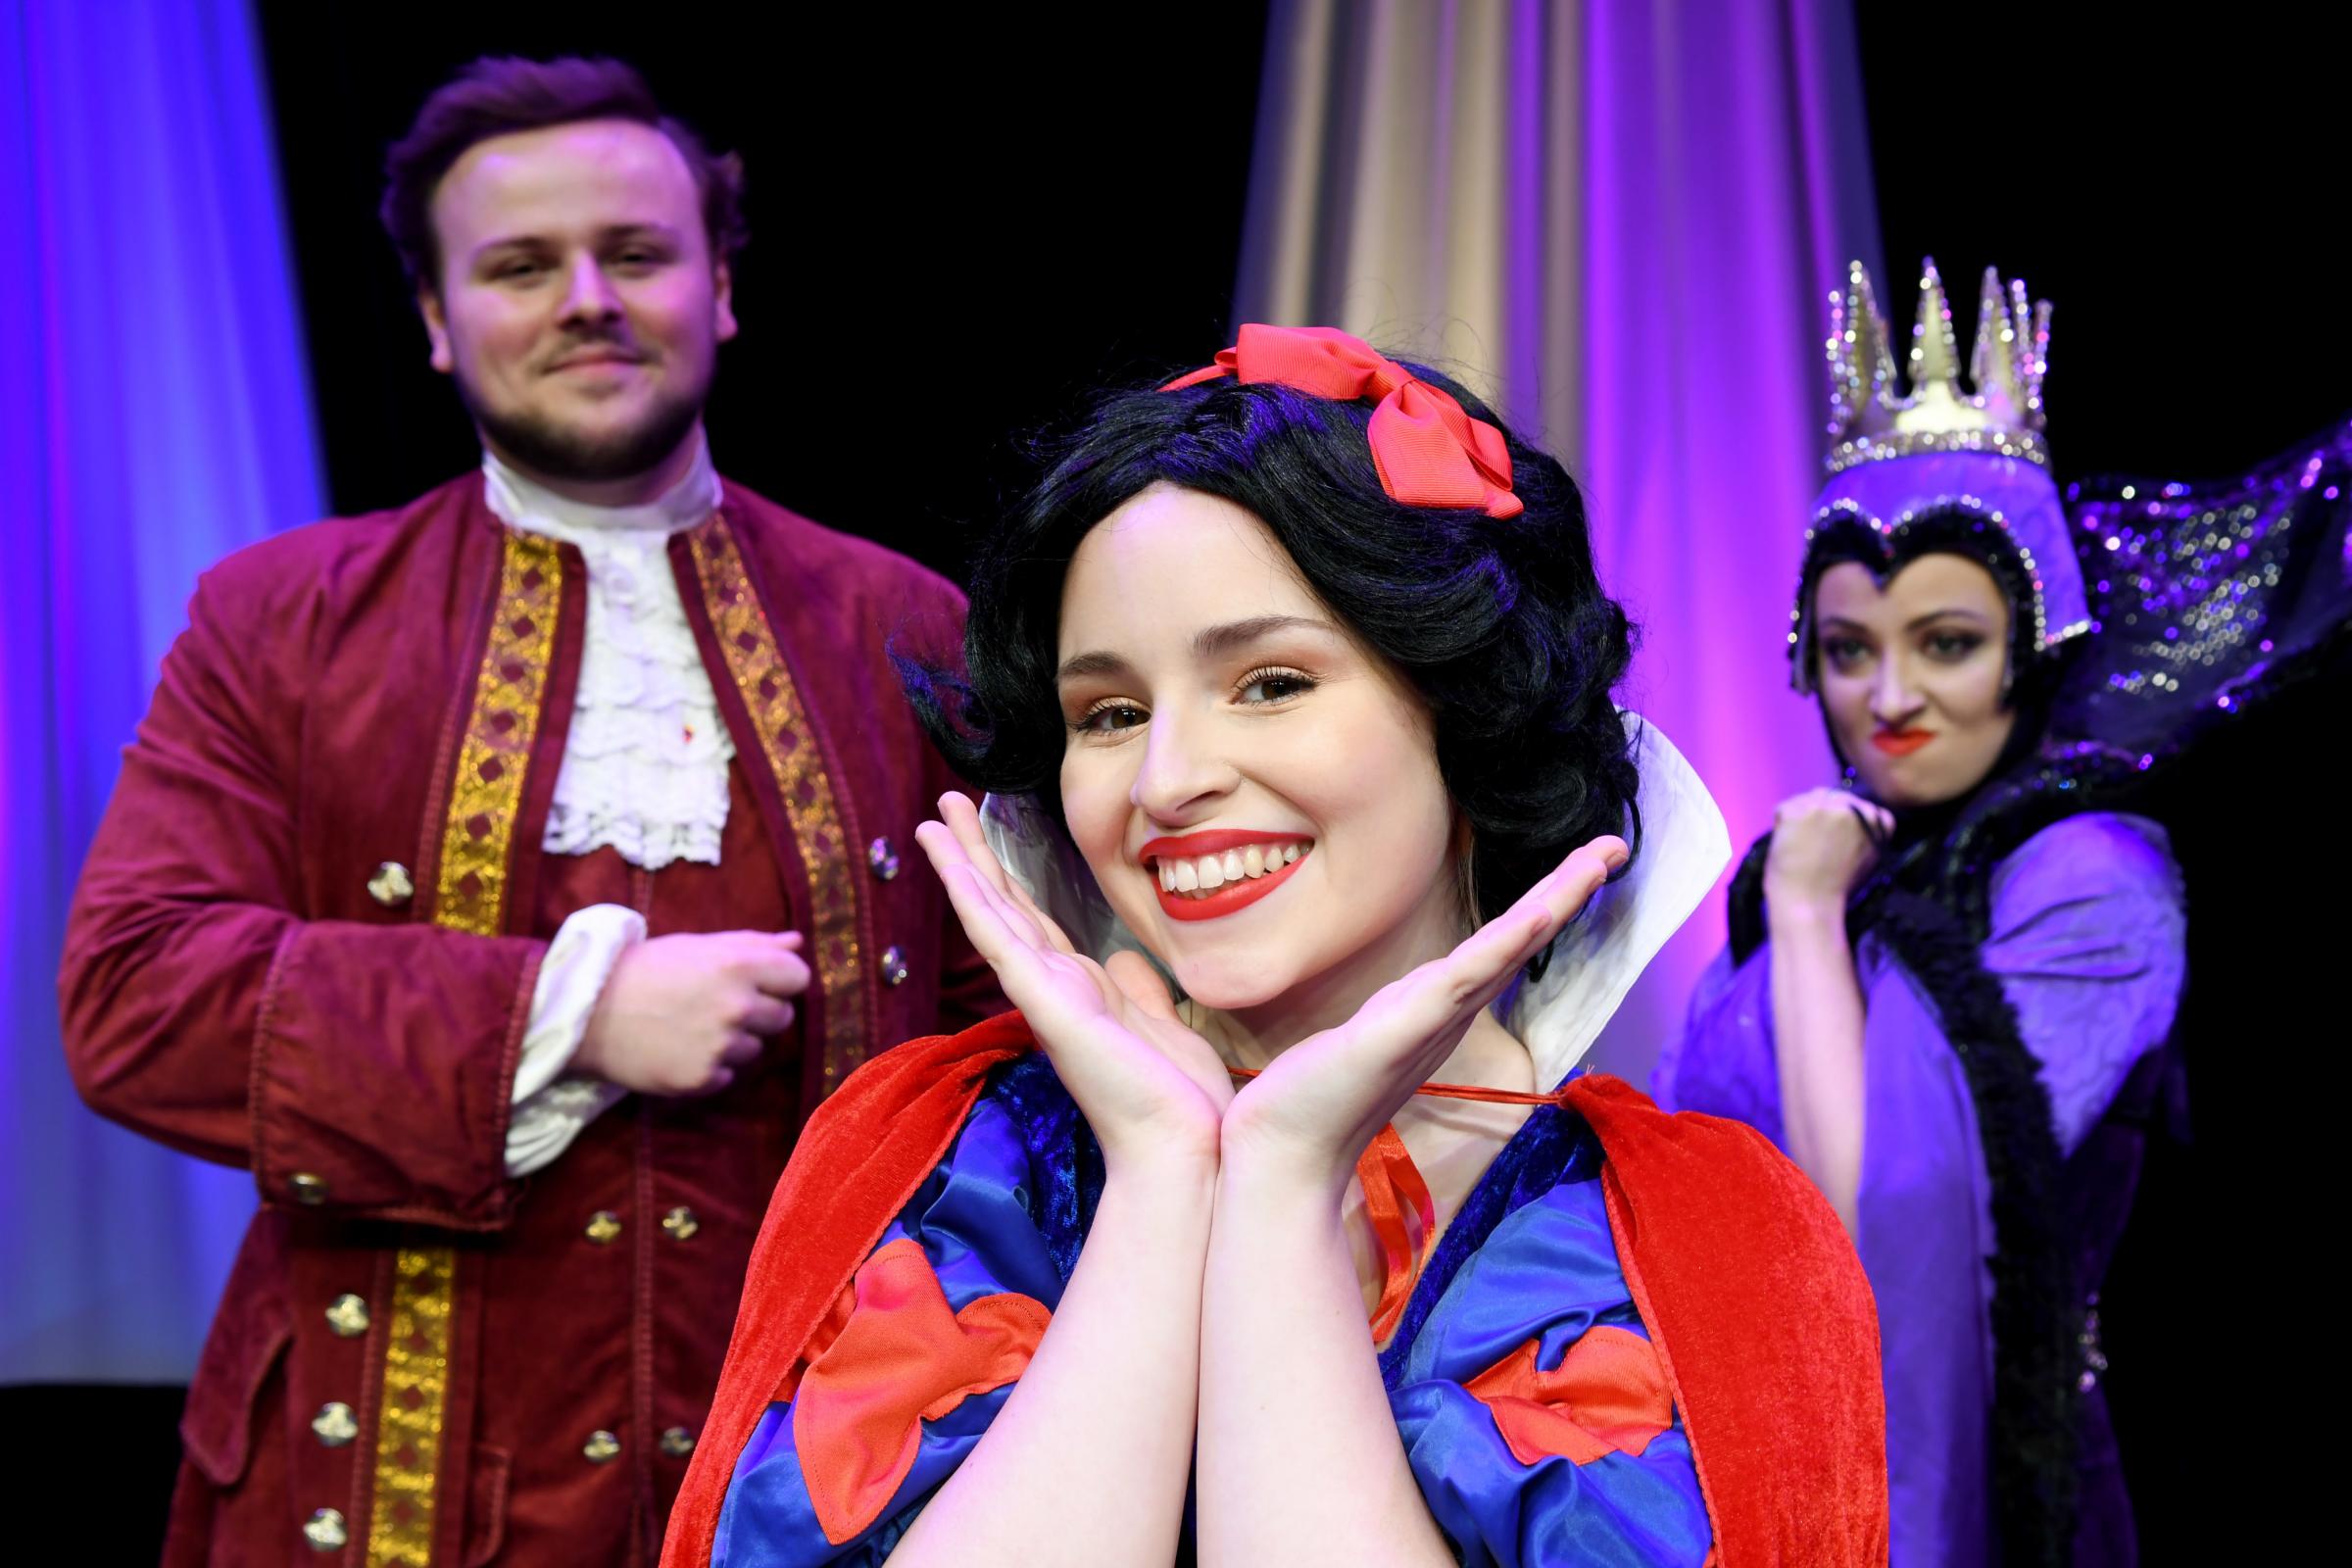 Callum Marshall as Prince William of Whitby, Sarah Dare as Snow White and Sarah Nelson as Horribella will take to the Parr Hall next year - Picture: Dave Gillespie